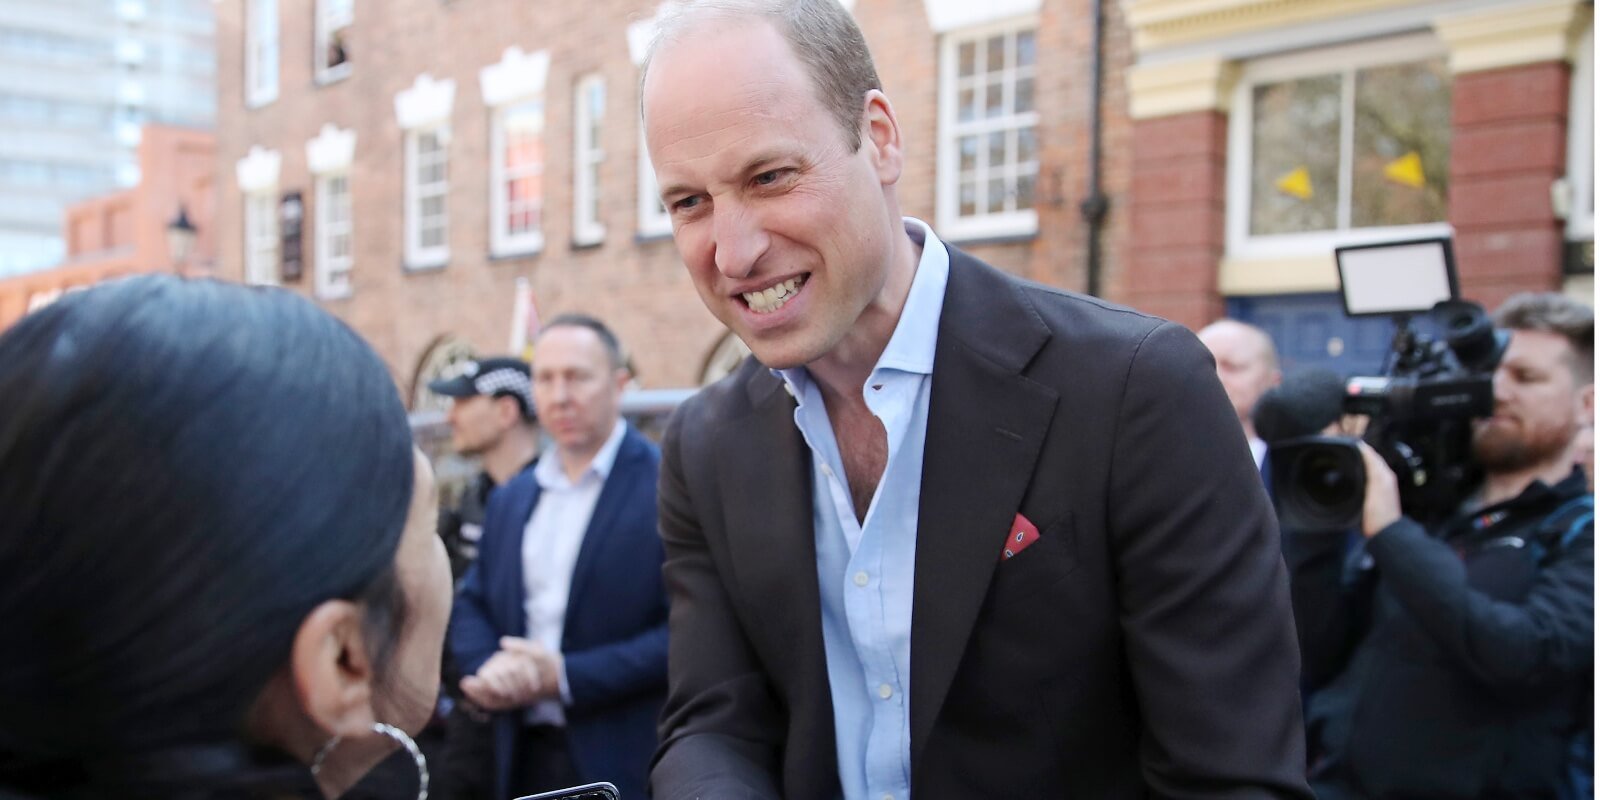 Prince William spoke candidly about royal life in a 2017 interview.